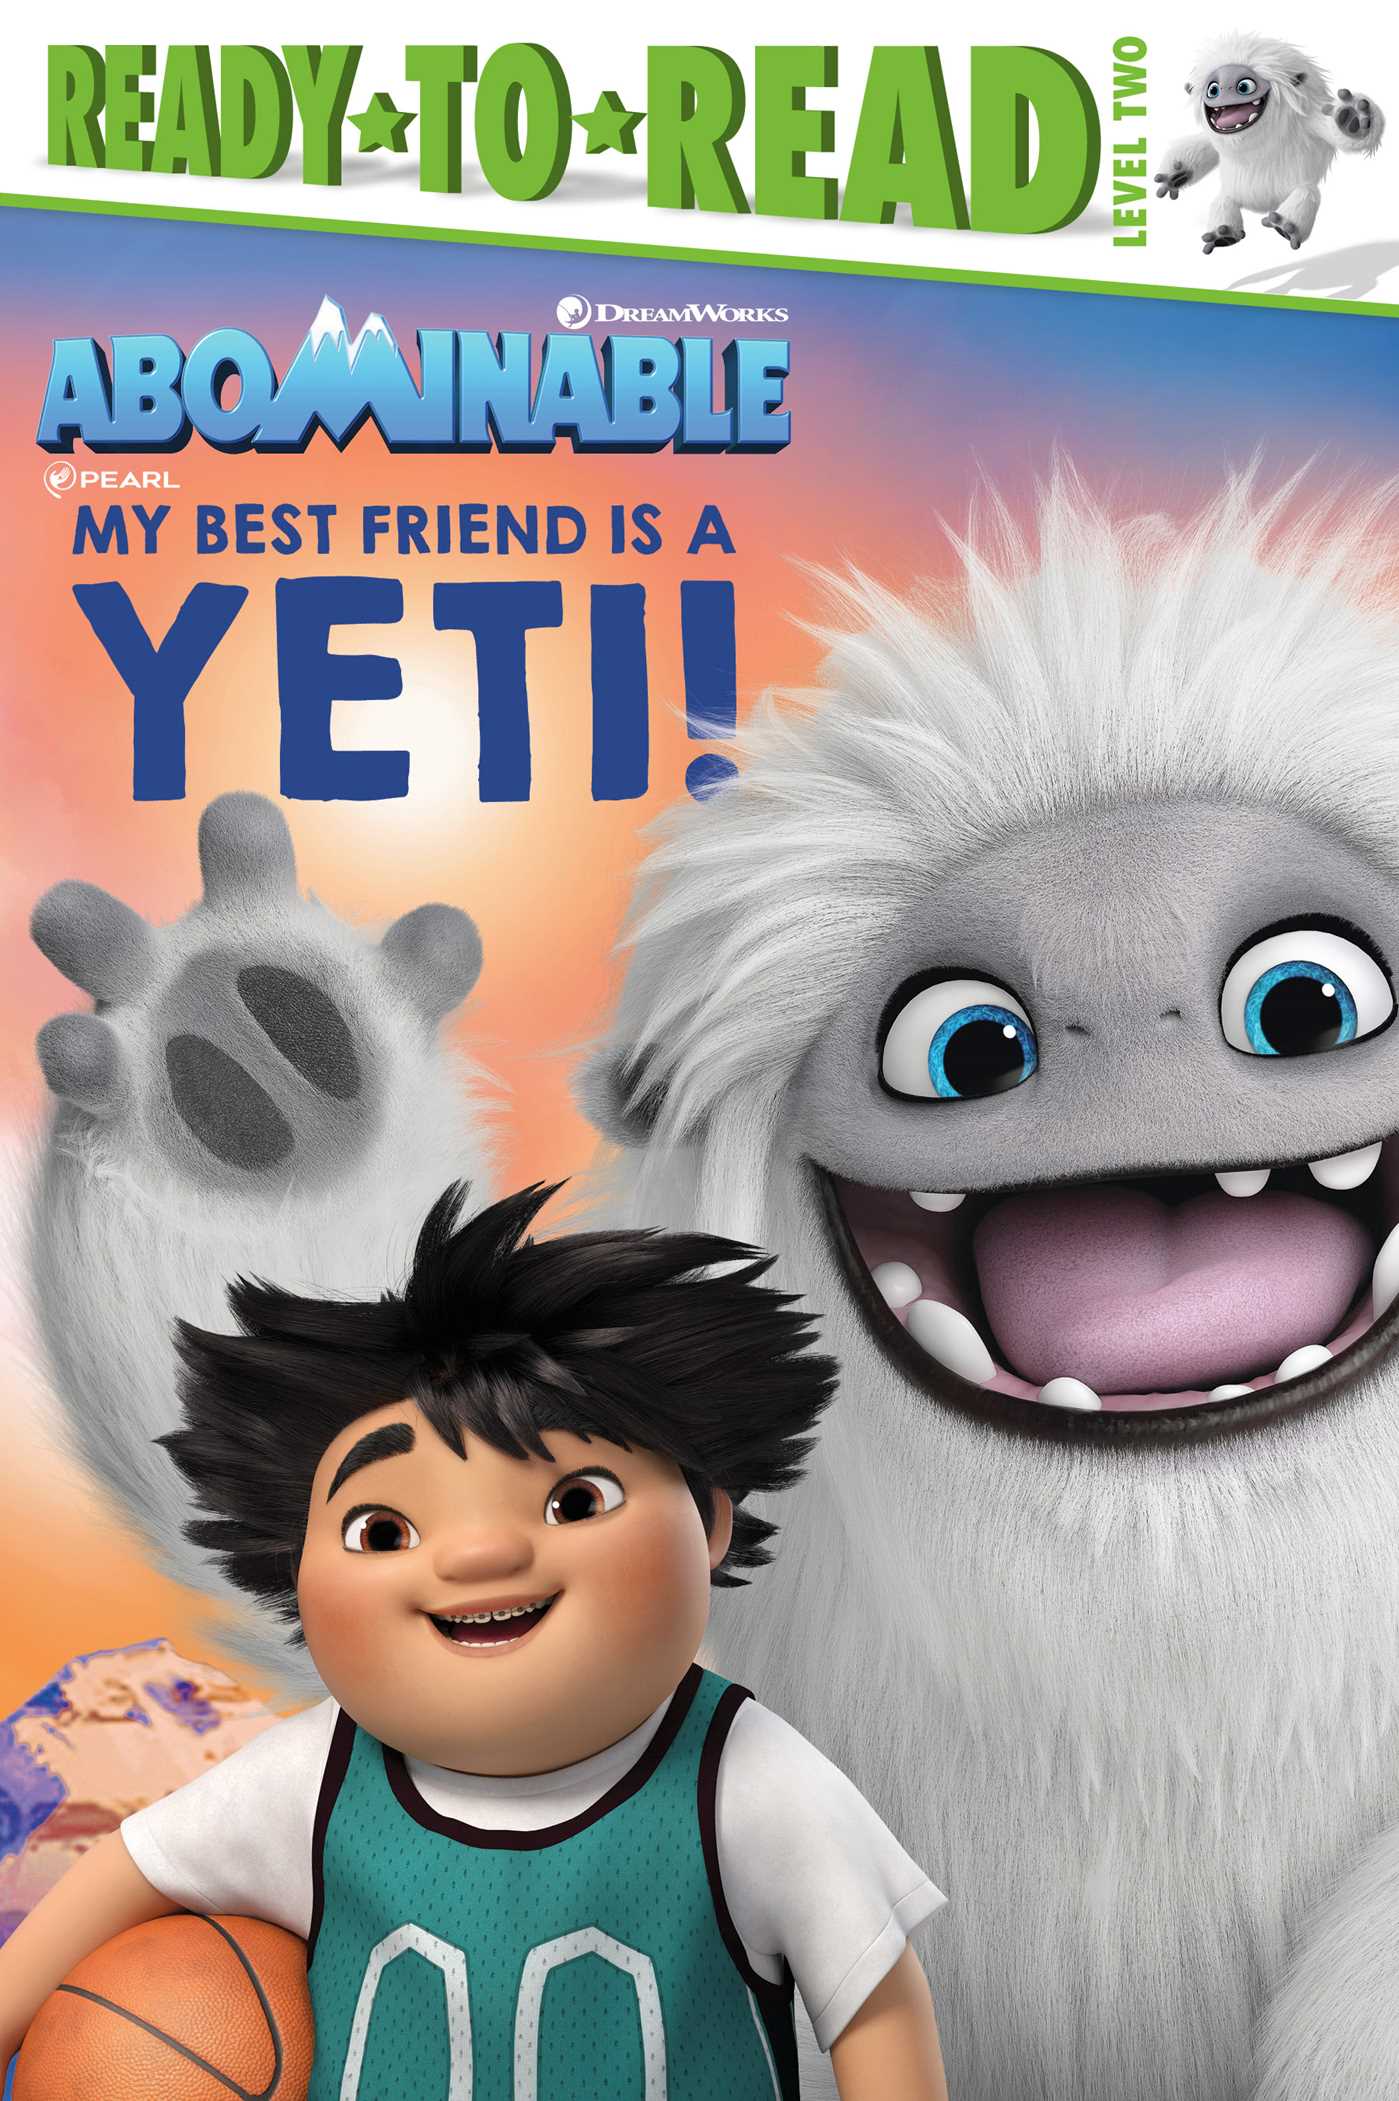 My Best Friend Is a Yeti!. Book by Patty Michaels, Patrick